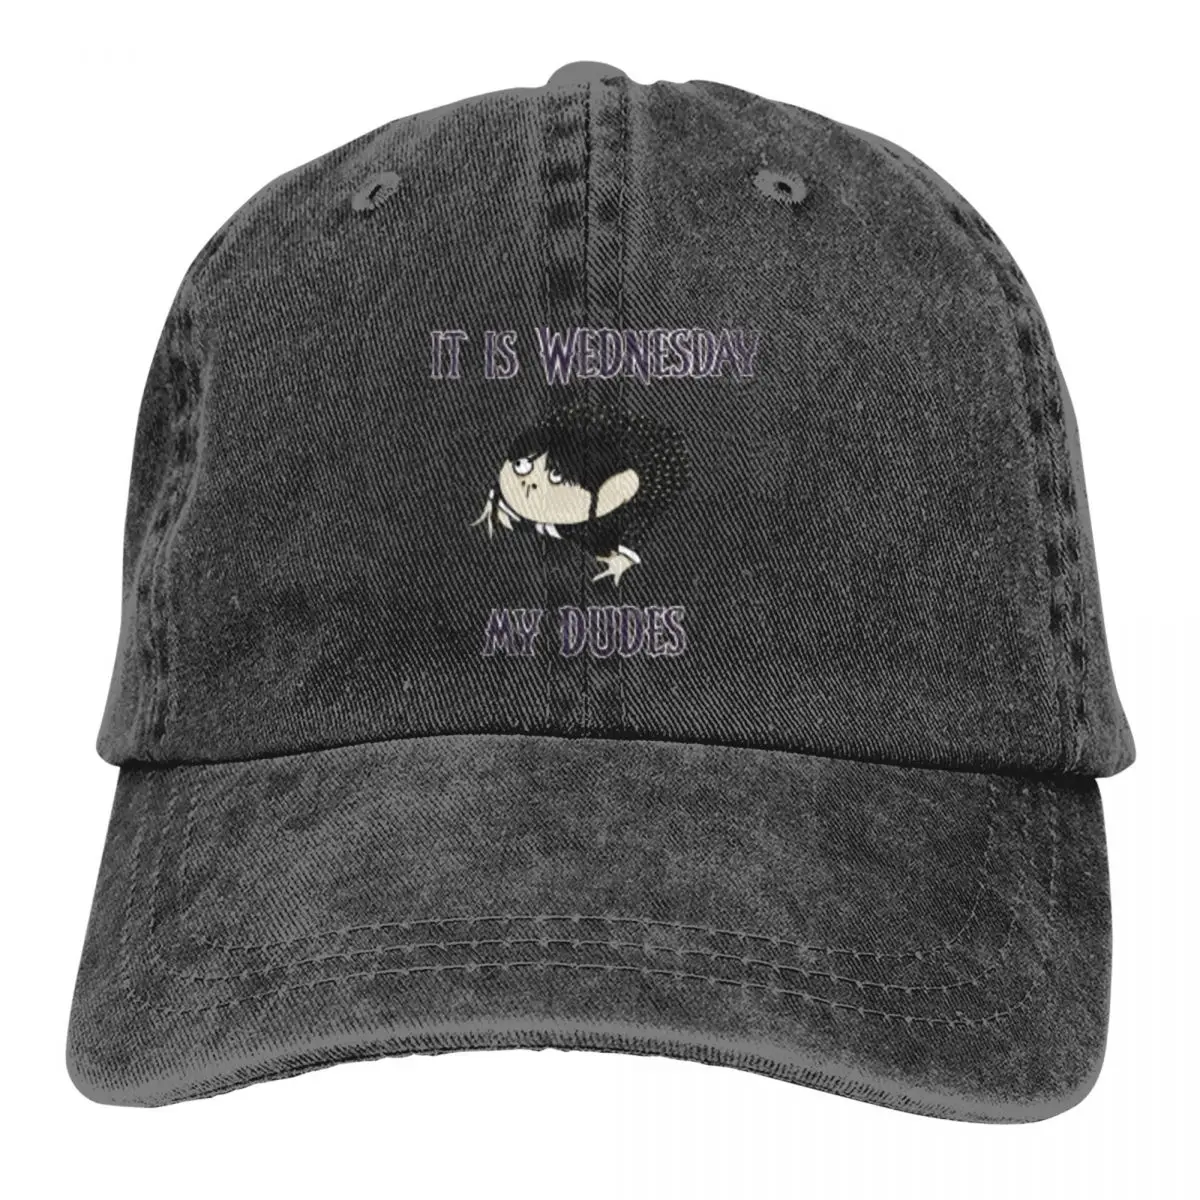 

Washed Men's Baseball Cap It Is Wednesday (Addams) My Dudes Trucker Snapback Caps Dad Hat Wednesday Golf Hats